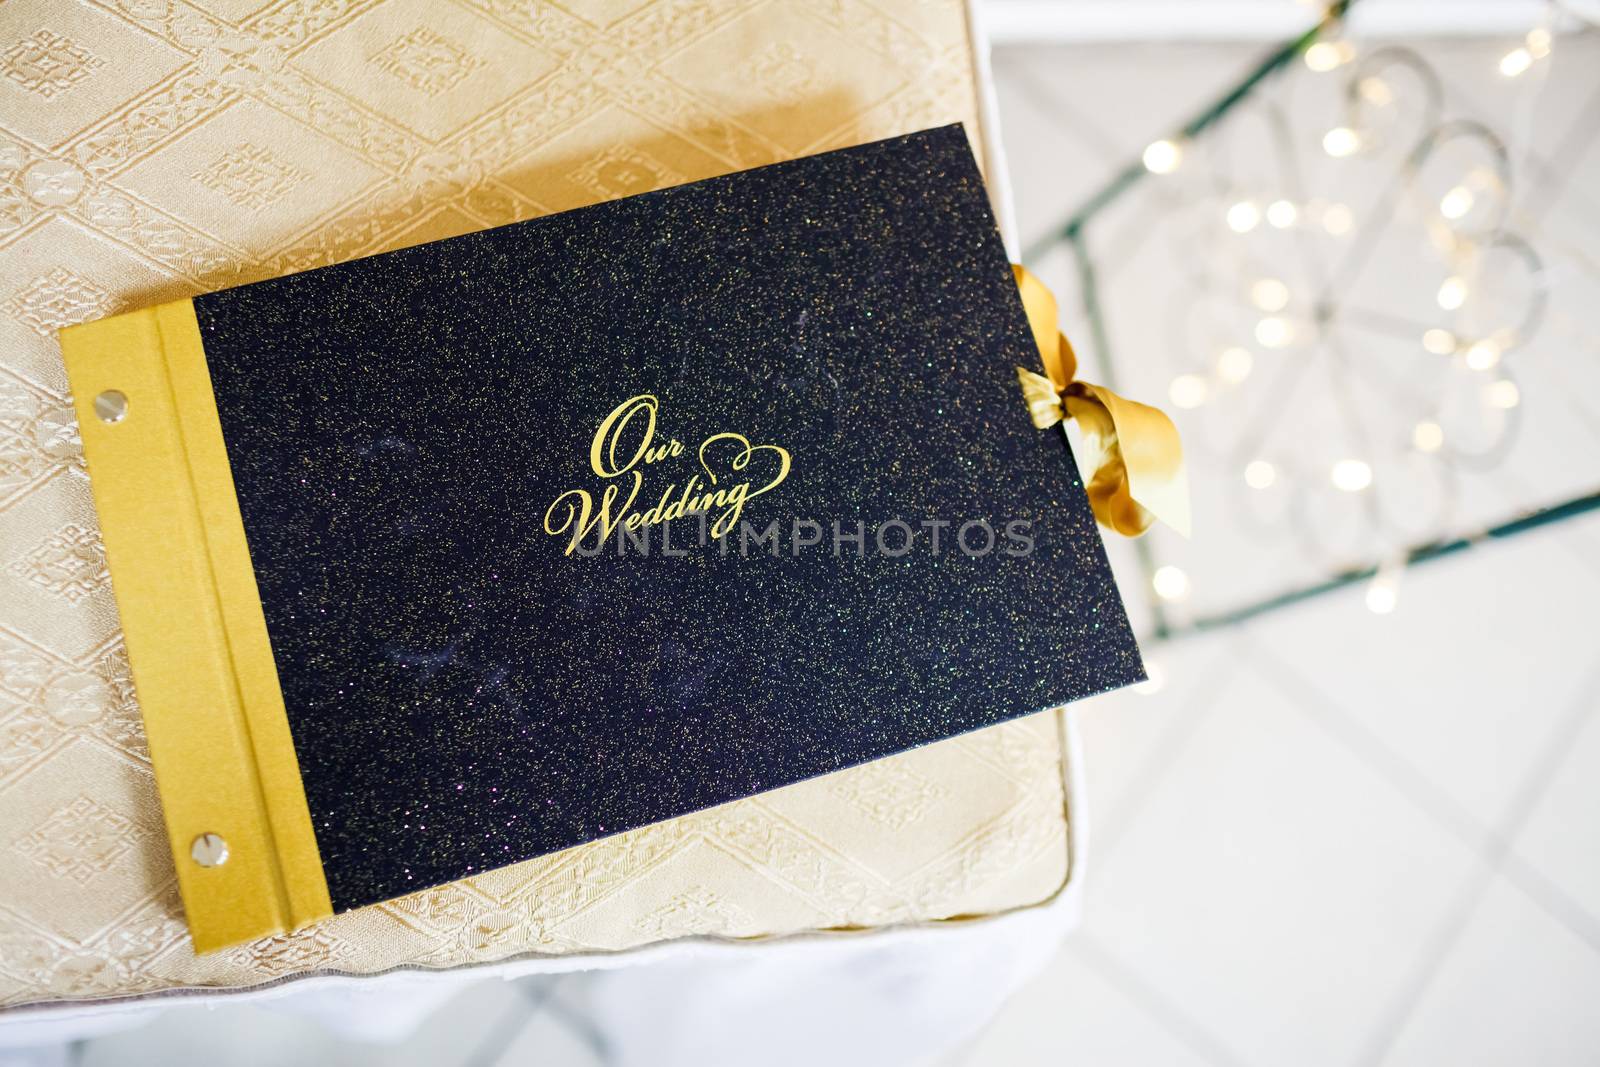 Our wedding photo album decorated with gold, photographic story of day. by Maynagashev